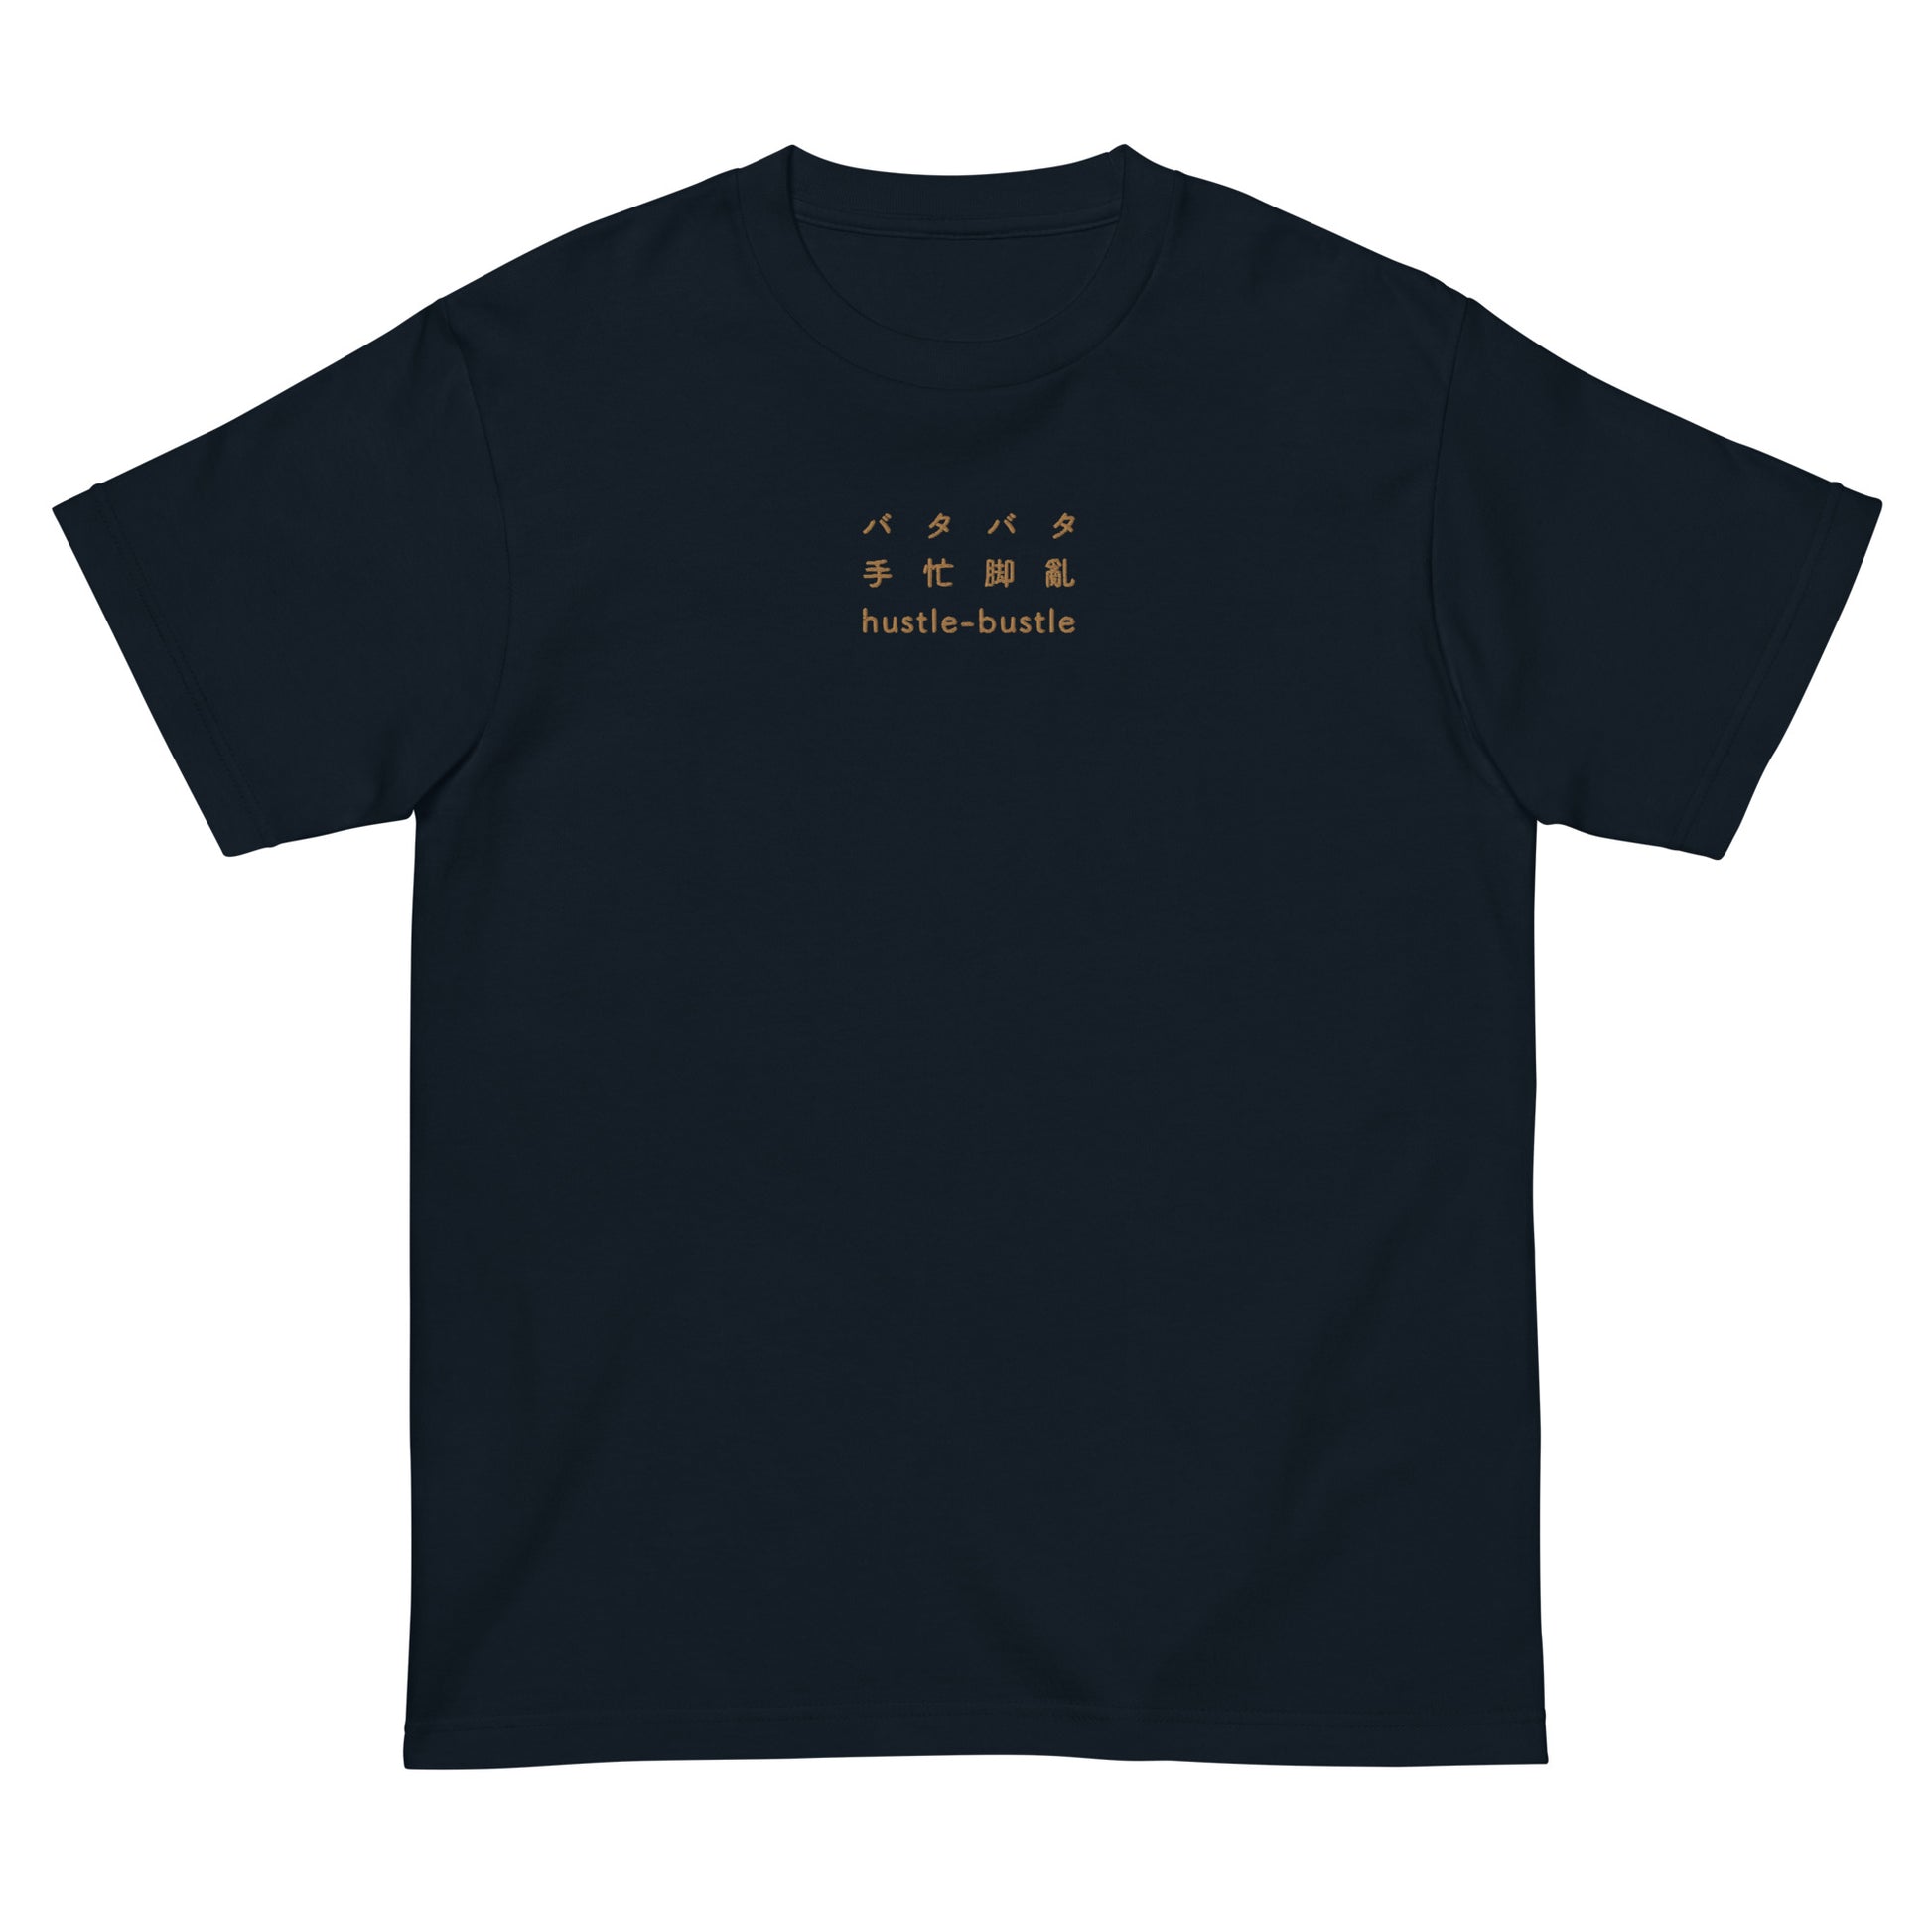 Navy High Quality Tee - Front Design with an Brown Embroidery "Hustle-Bustle" in Japanese, Chinese and English